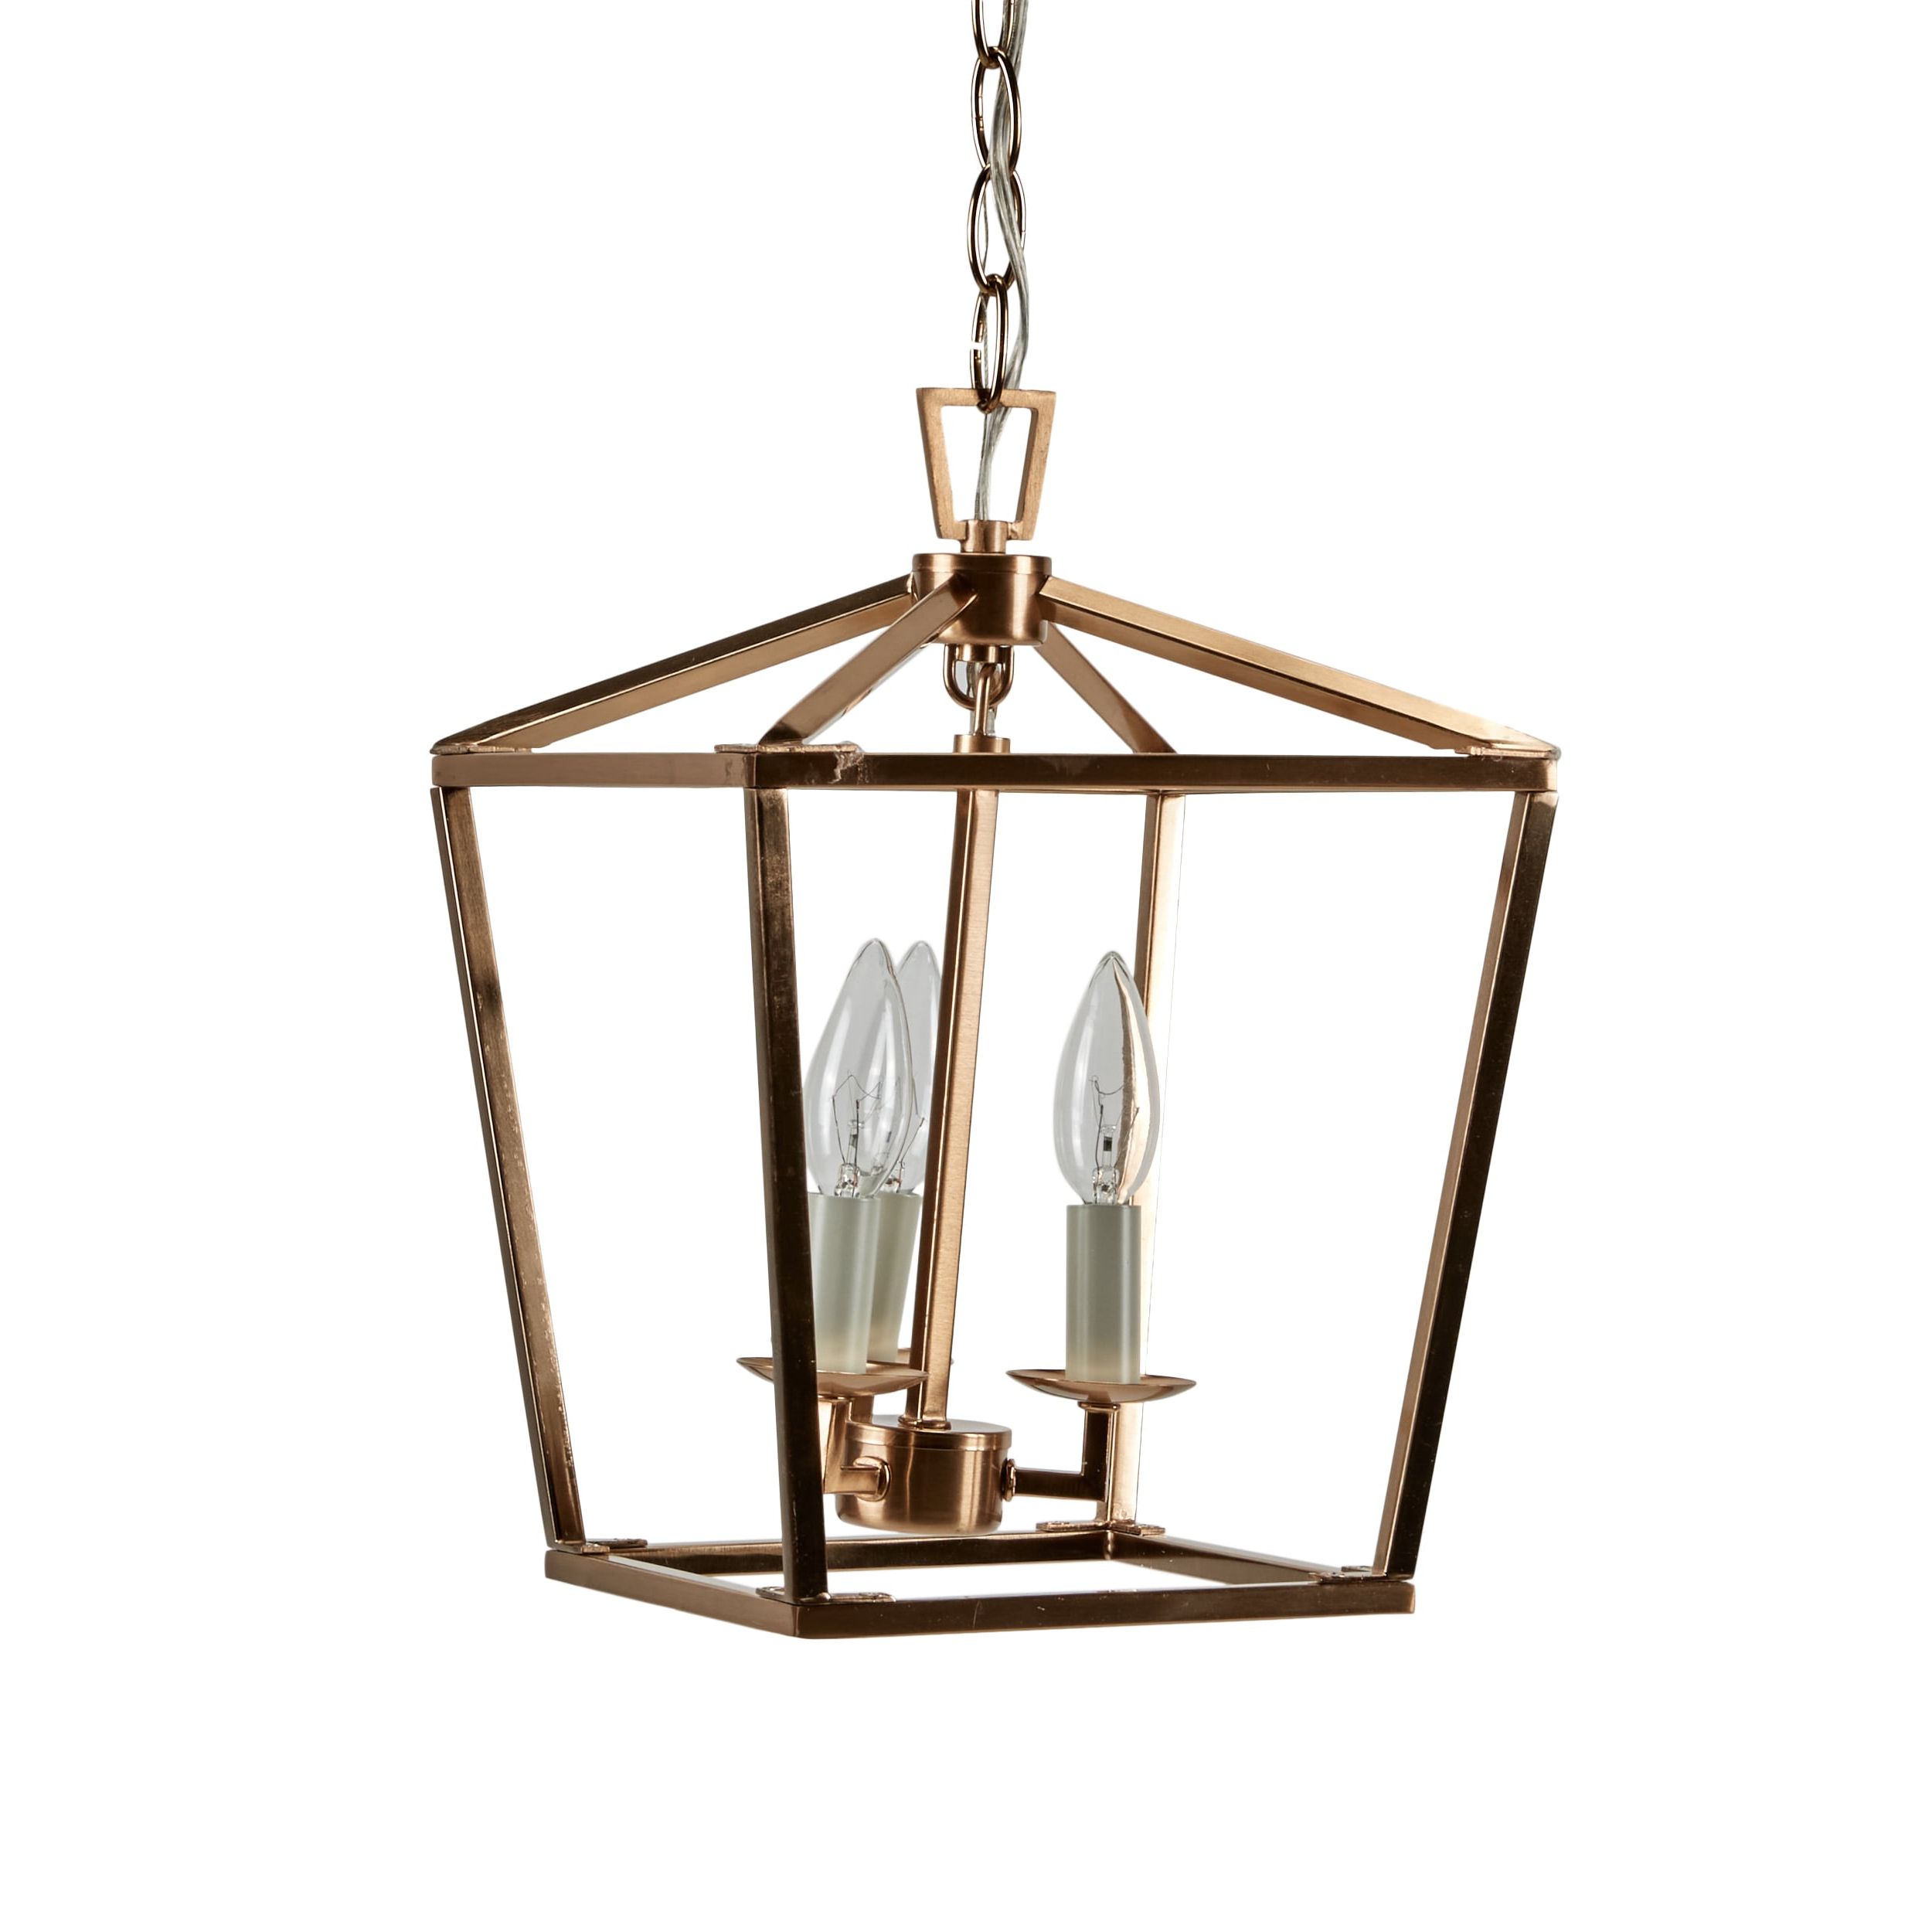 Mini Lantern Chandeliers Within Most Up To Date Sea Gull Lighting Dianna 3 Light Satin Brass Transitional Lantern Led Mini  Pendant Light In The Pendant Lighting Department At Lowes (View 14 of 15)